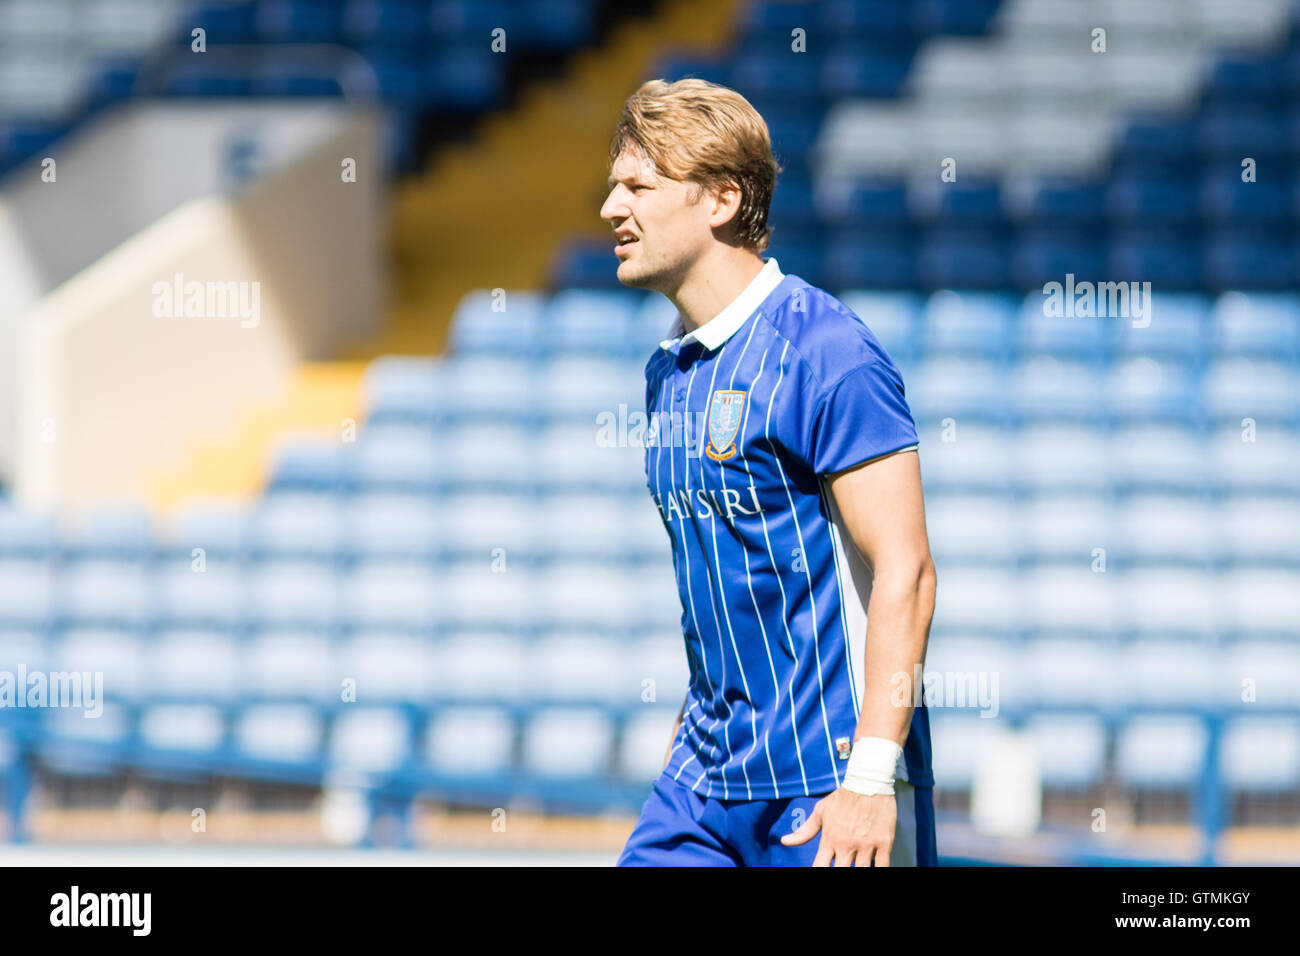 Glenn Loovens plying for Sheffield Wednesday Under 23's in the Premier League 2 Stock Photo